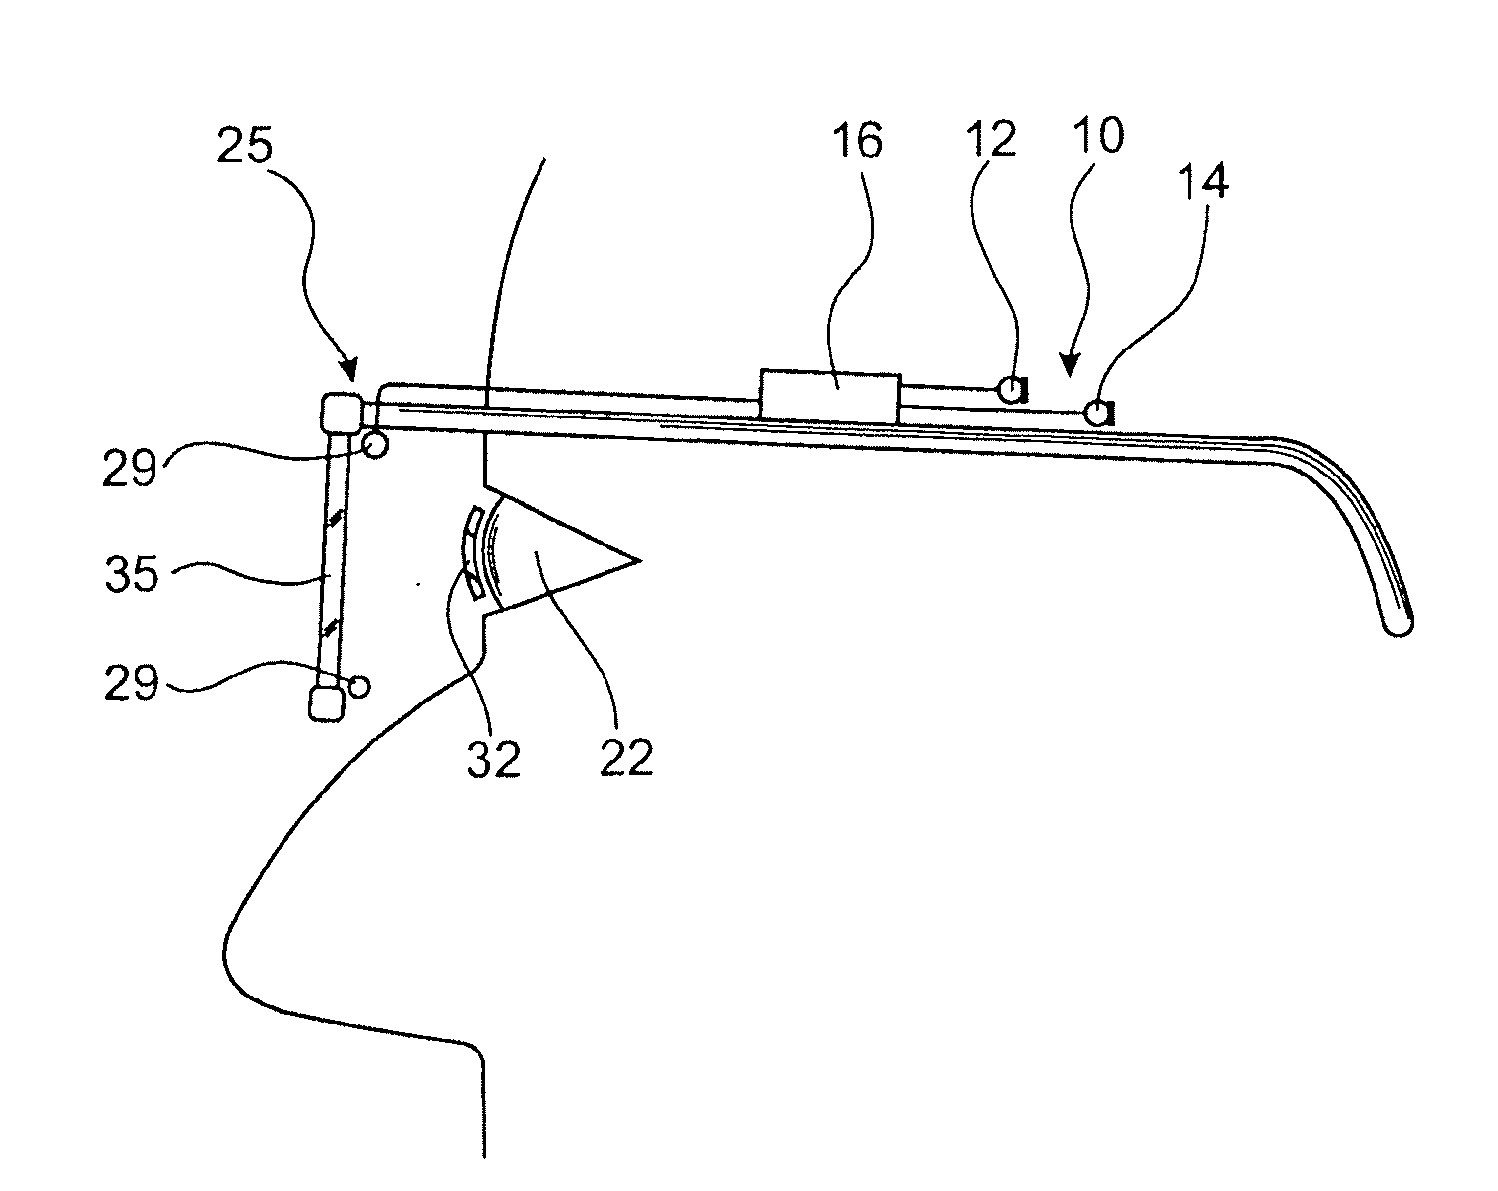 Hearing instrument and method for providing hearing assistance to a user